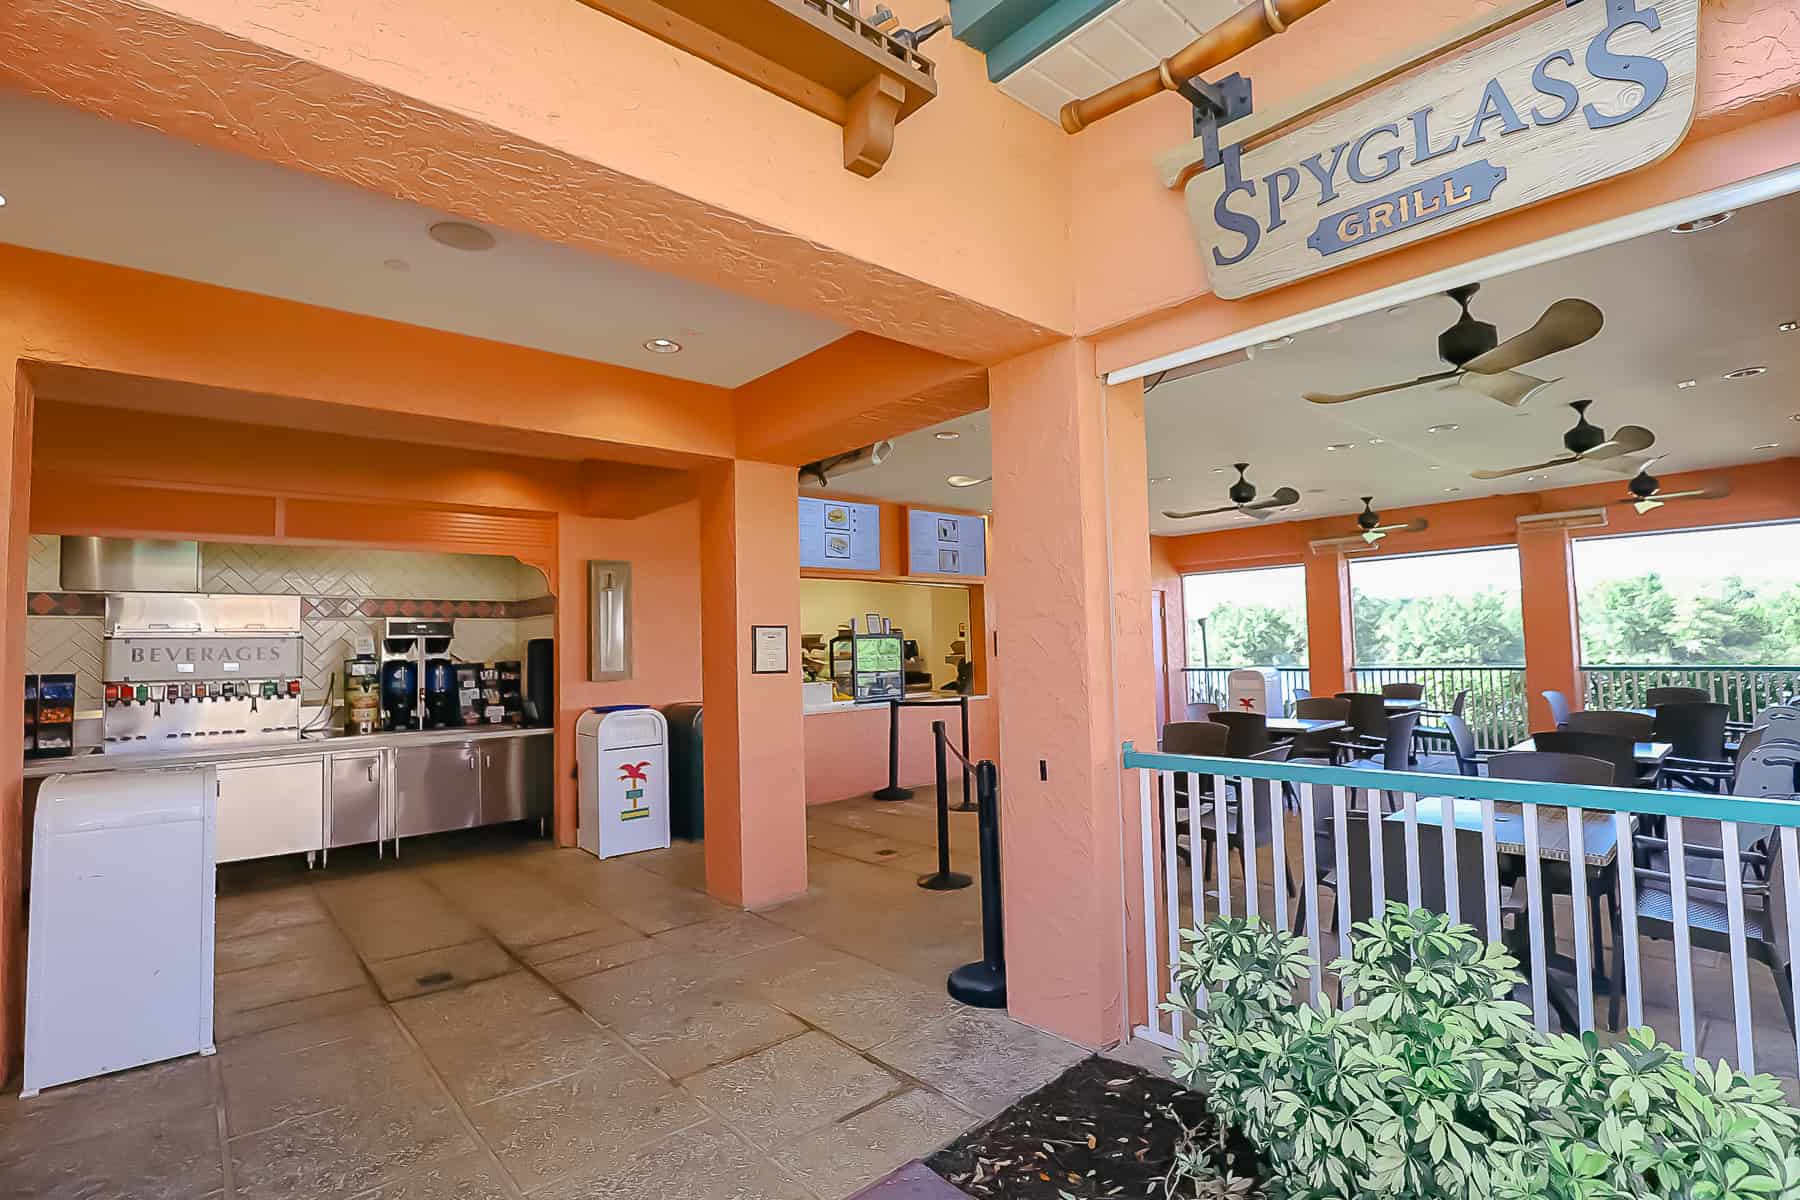 Shows the Spyglass Grill sign, dining area, beverage refill station, and counter to place orders. 